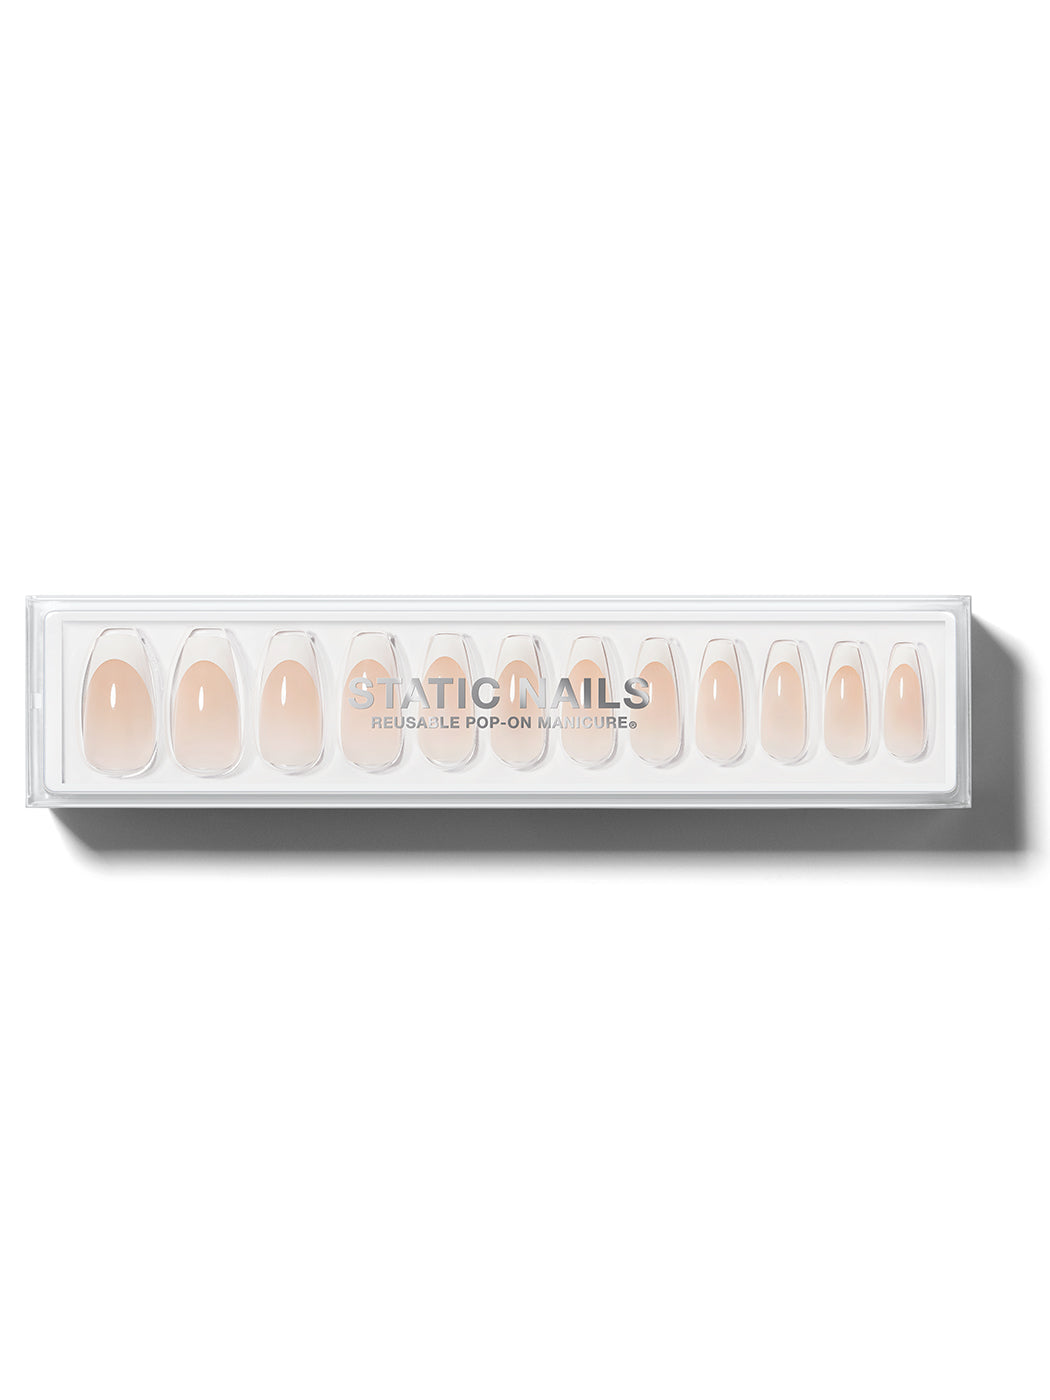 White french manicure in long coffin shape,